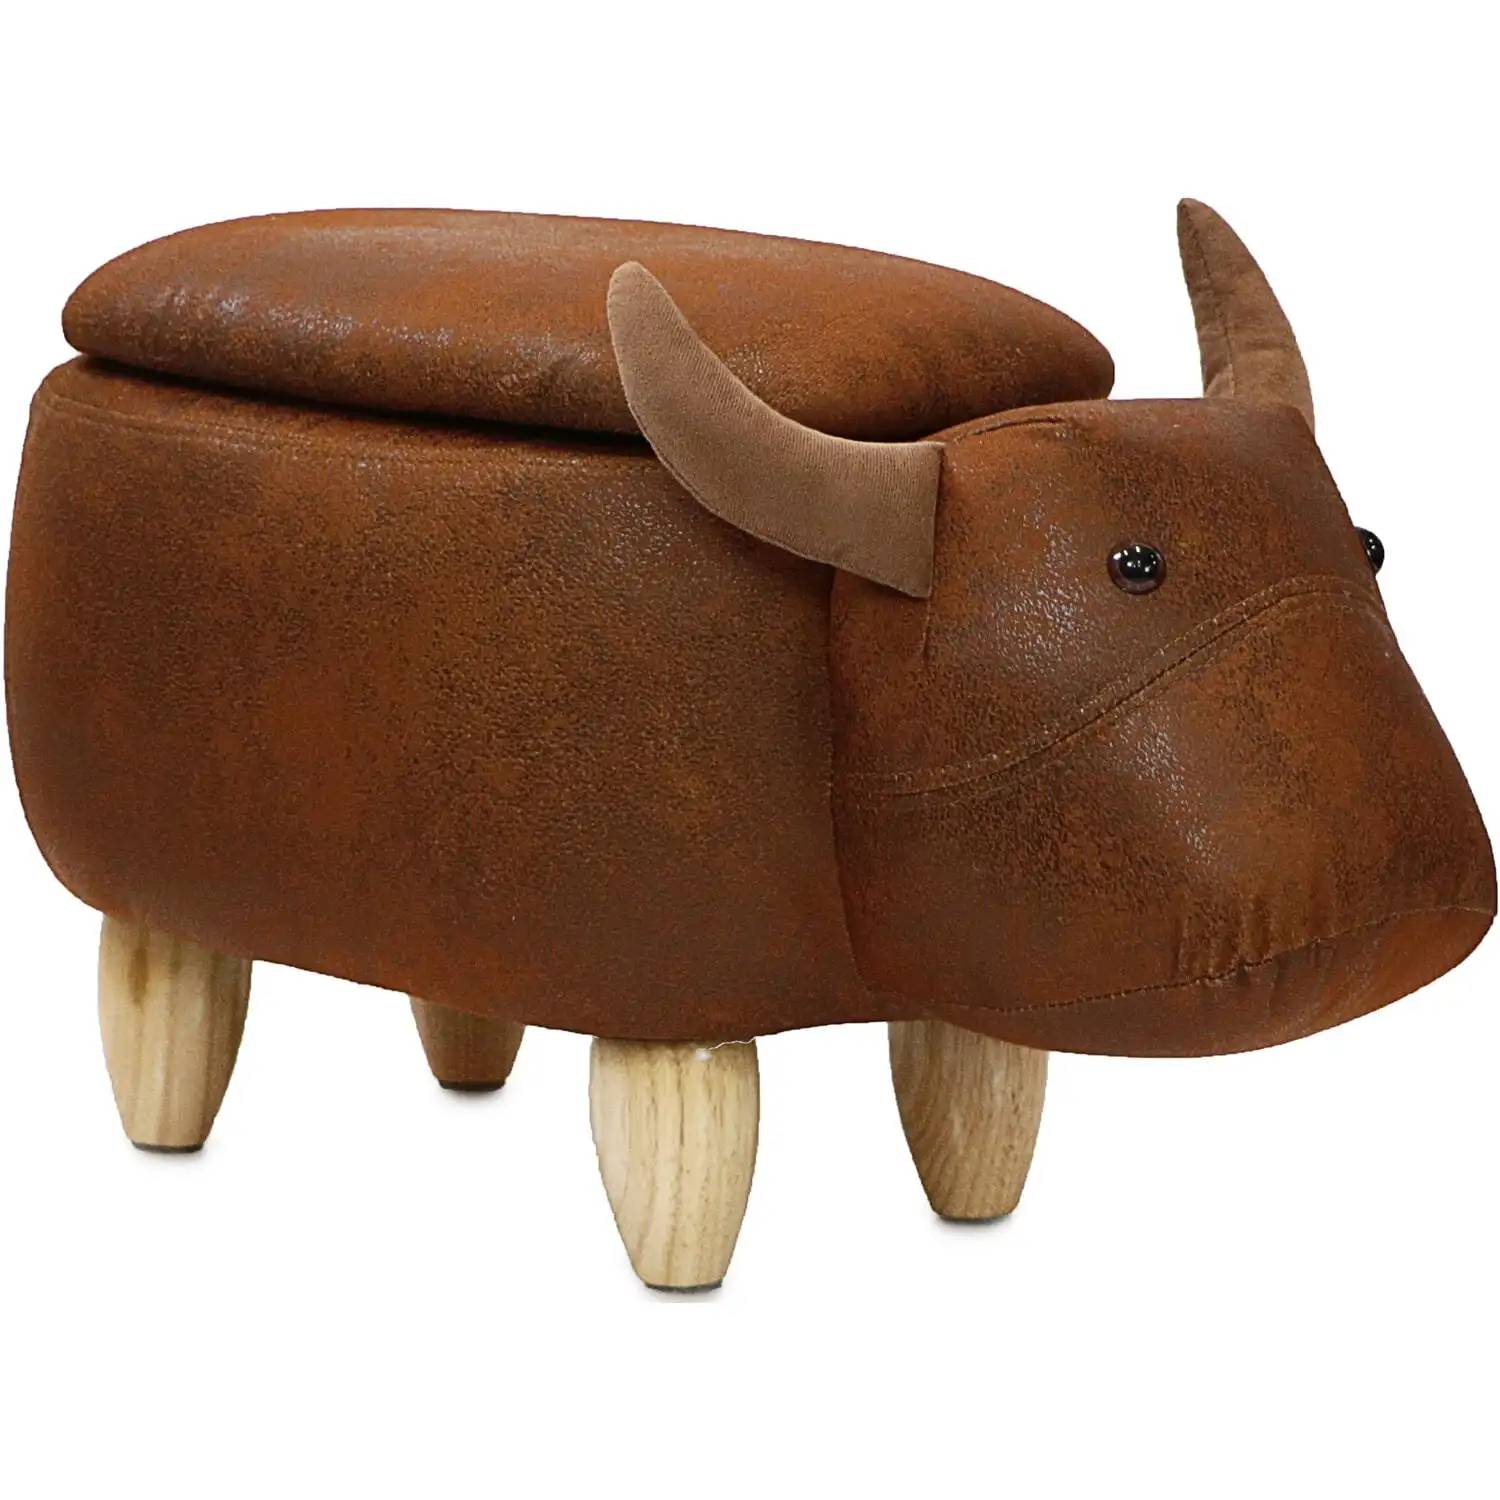 

Critter Sitters 15-In. Seat Height Brown Cow Animal Shape Storage Ottoman - Furniture for Nursery, Bedroom, Playroom, and Living